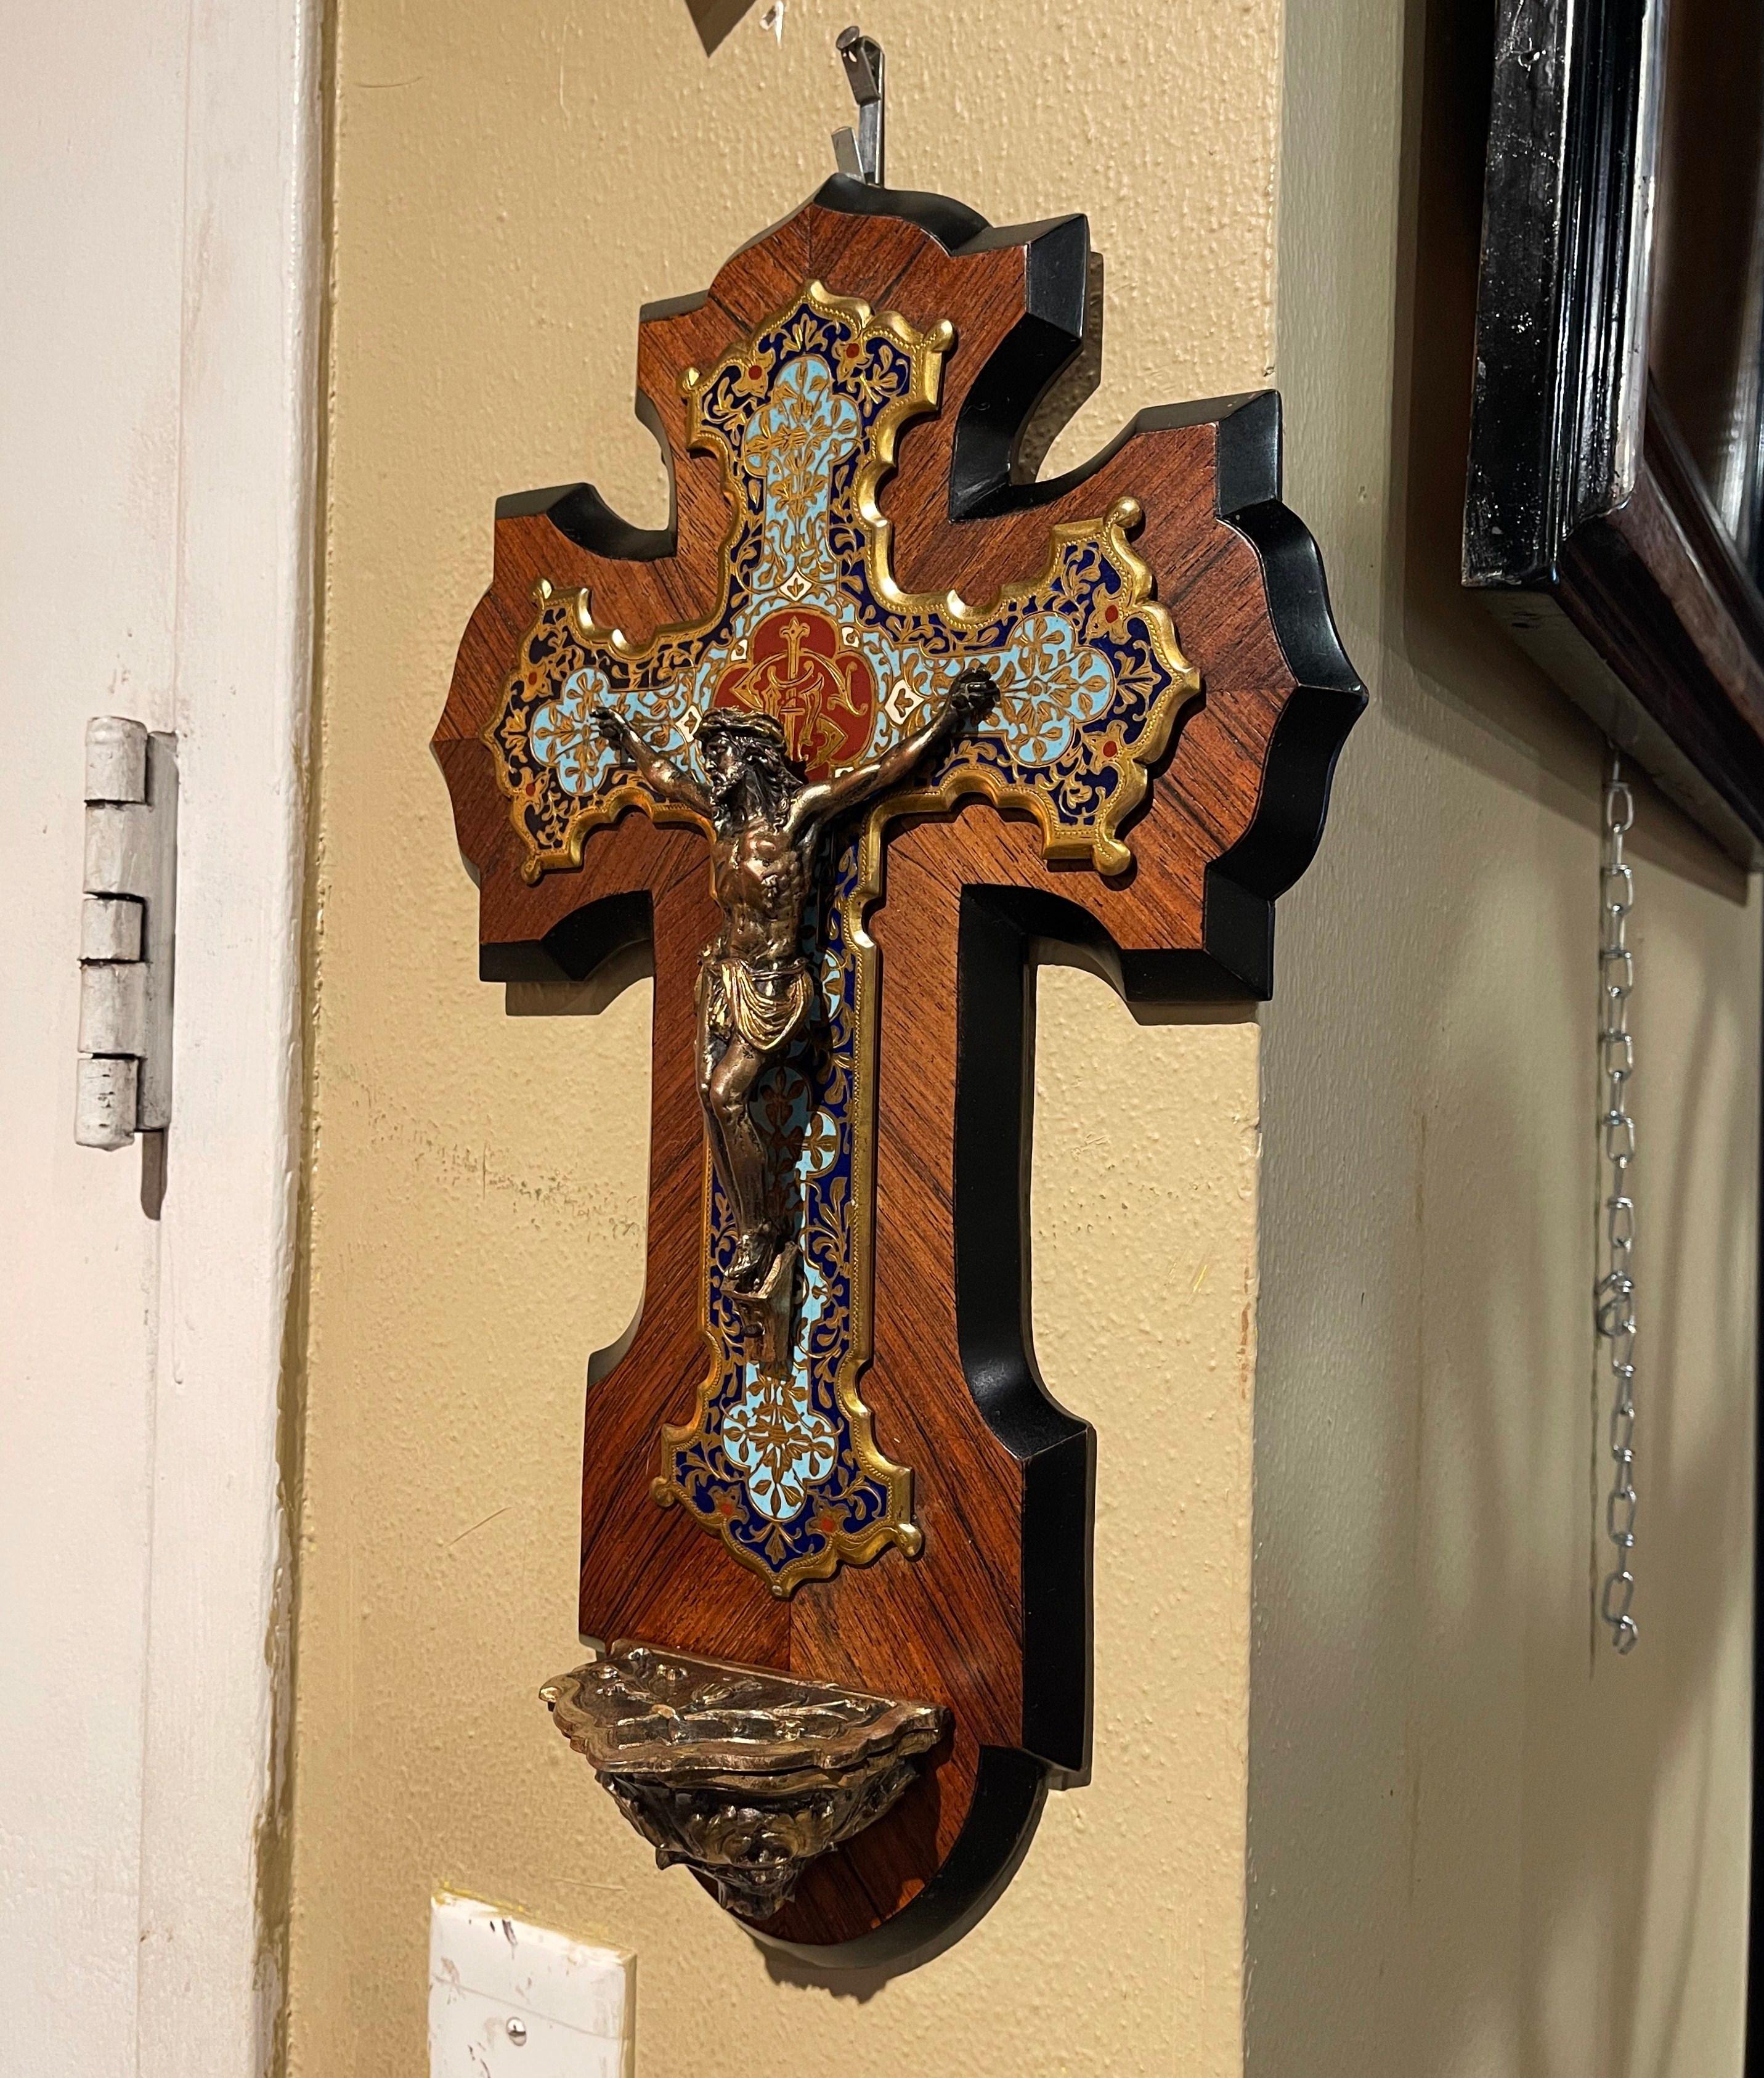 This colorful champleve crucifix with holy water font recipient was created in France, circa 1890. The large antique cross mounted on a marquetry walnut plaque, features beautiful, intricate cloisonné work with enamel, stone and bronze star decor